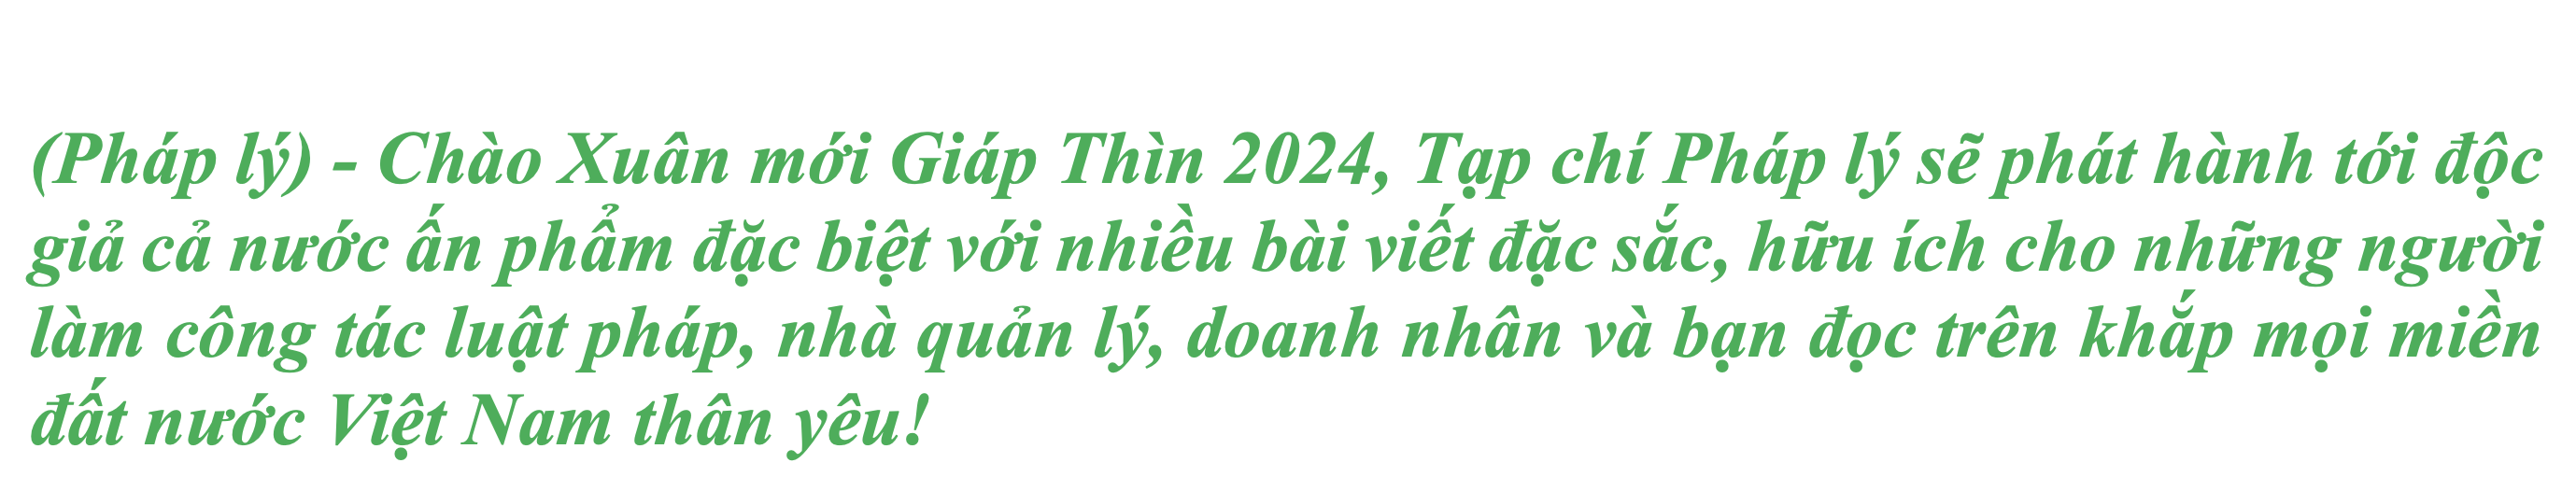 anh-man-hinh-2024-01-11-luc-141035-1704957055.png